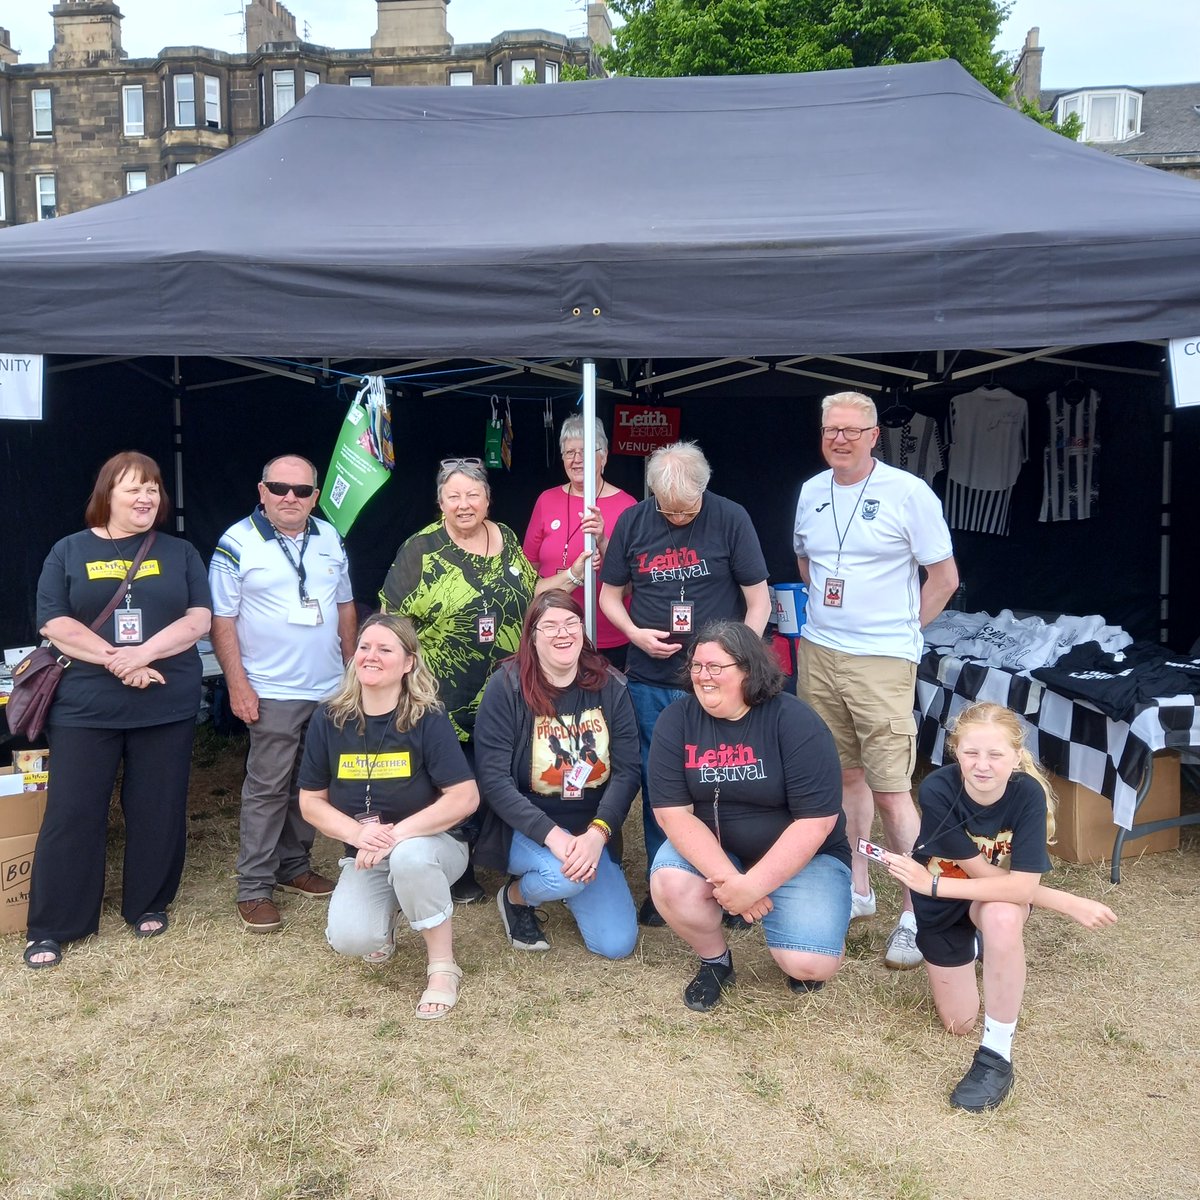 #LeithFestivalCrew @LeithAthleticFC , @LeithLinks_CC and @EdinburghAll ready to greet the crowds @The_Proclaimers #LeithLinks! If you are heading down come and say hello!